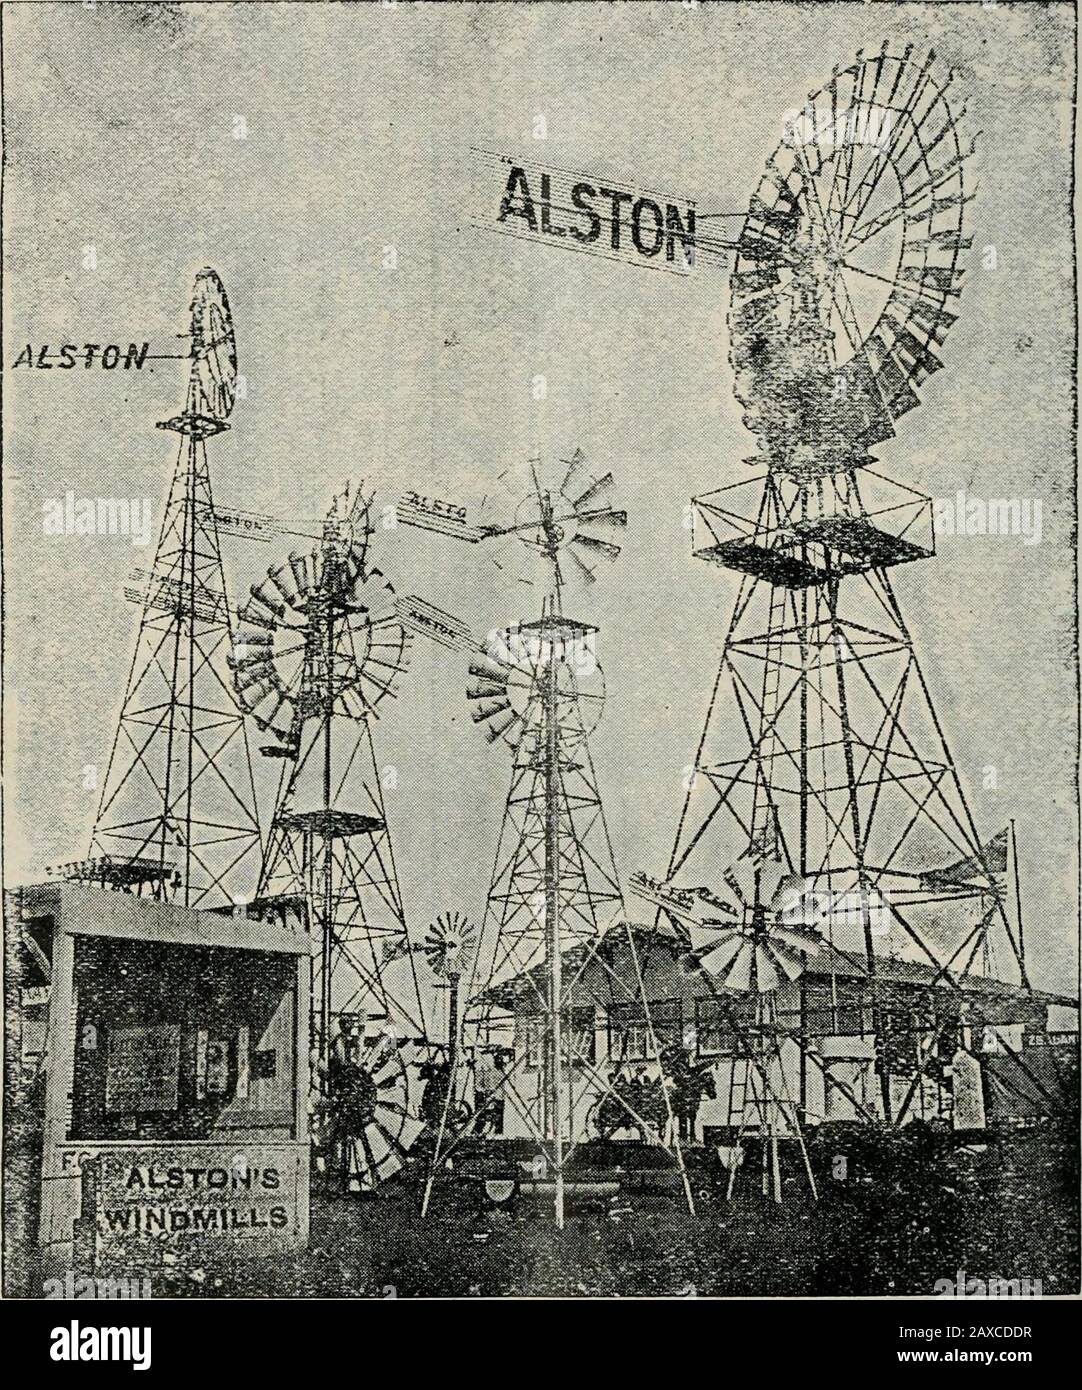 The Journal of the Department of Agriculture, Victoria . FWVWvVVN t/2 5 CQ ^ t/5 e&lt; H 330 w -t 6/3 ^ ?-J zj Journal of Agriculture, Victoria. [lo June, 1912. piston s Patent Windmills ?AT THE ROYAL SHOW.-. At the recent Iloyal Show a fine collection of Windmills was exhibited by James Alston,of Queens Bridge, Melbourne. Mills of all diameters, from 6 ft. to 25 ft. were shownat work, suitable to all requirements of farmers or stock raisers, the small Mills beingsuitable for lifting modei-ate supplies from shallow wells, while the larger sizes are capableof dealing with almost any depths. A s Stock Photo